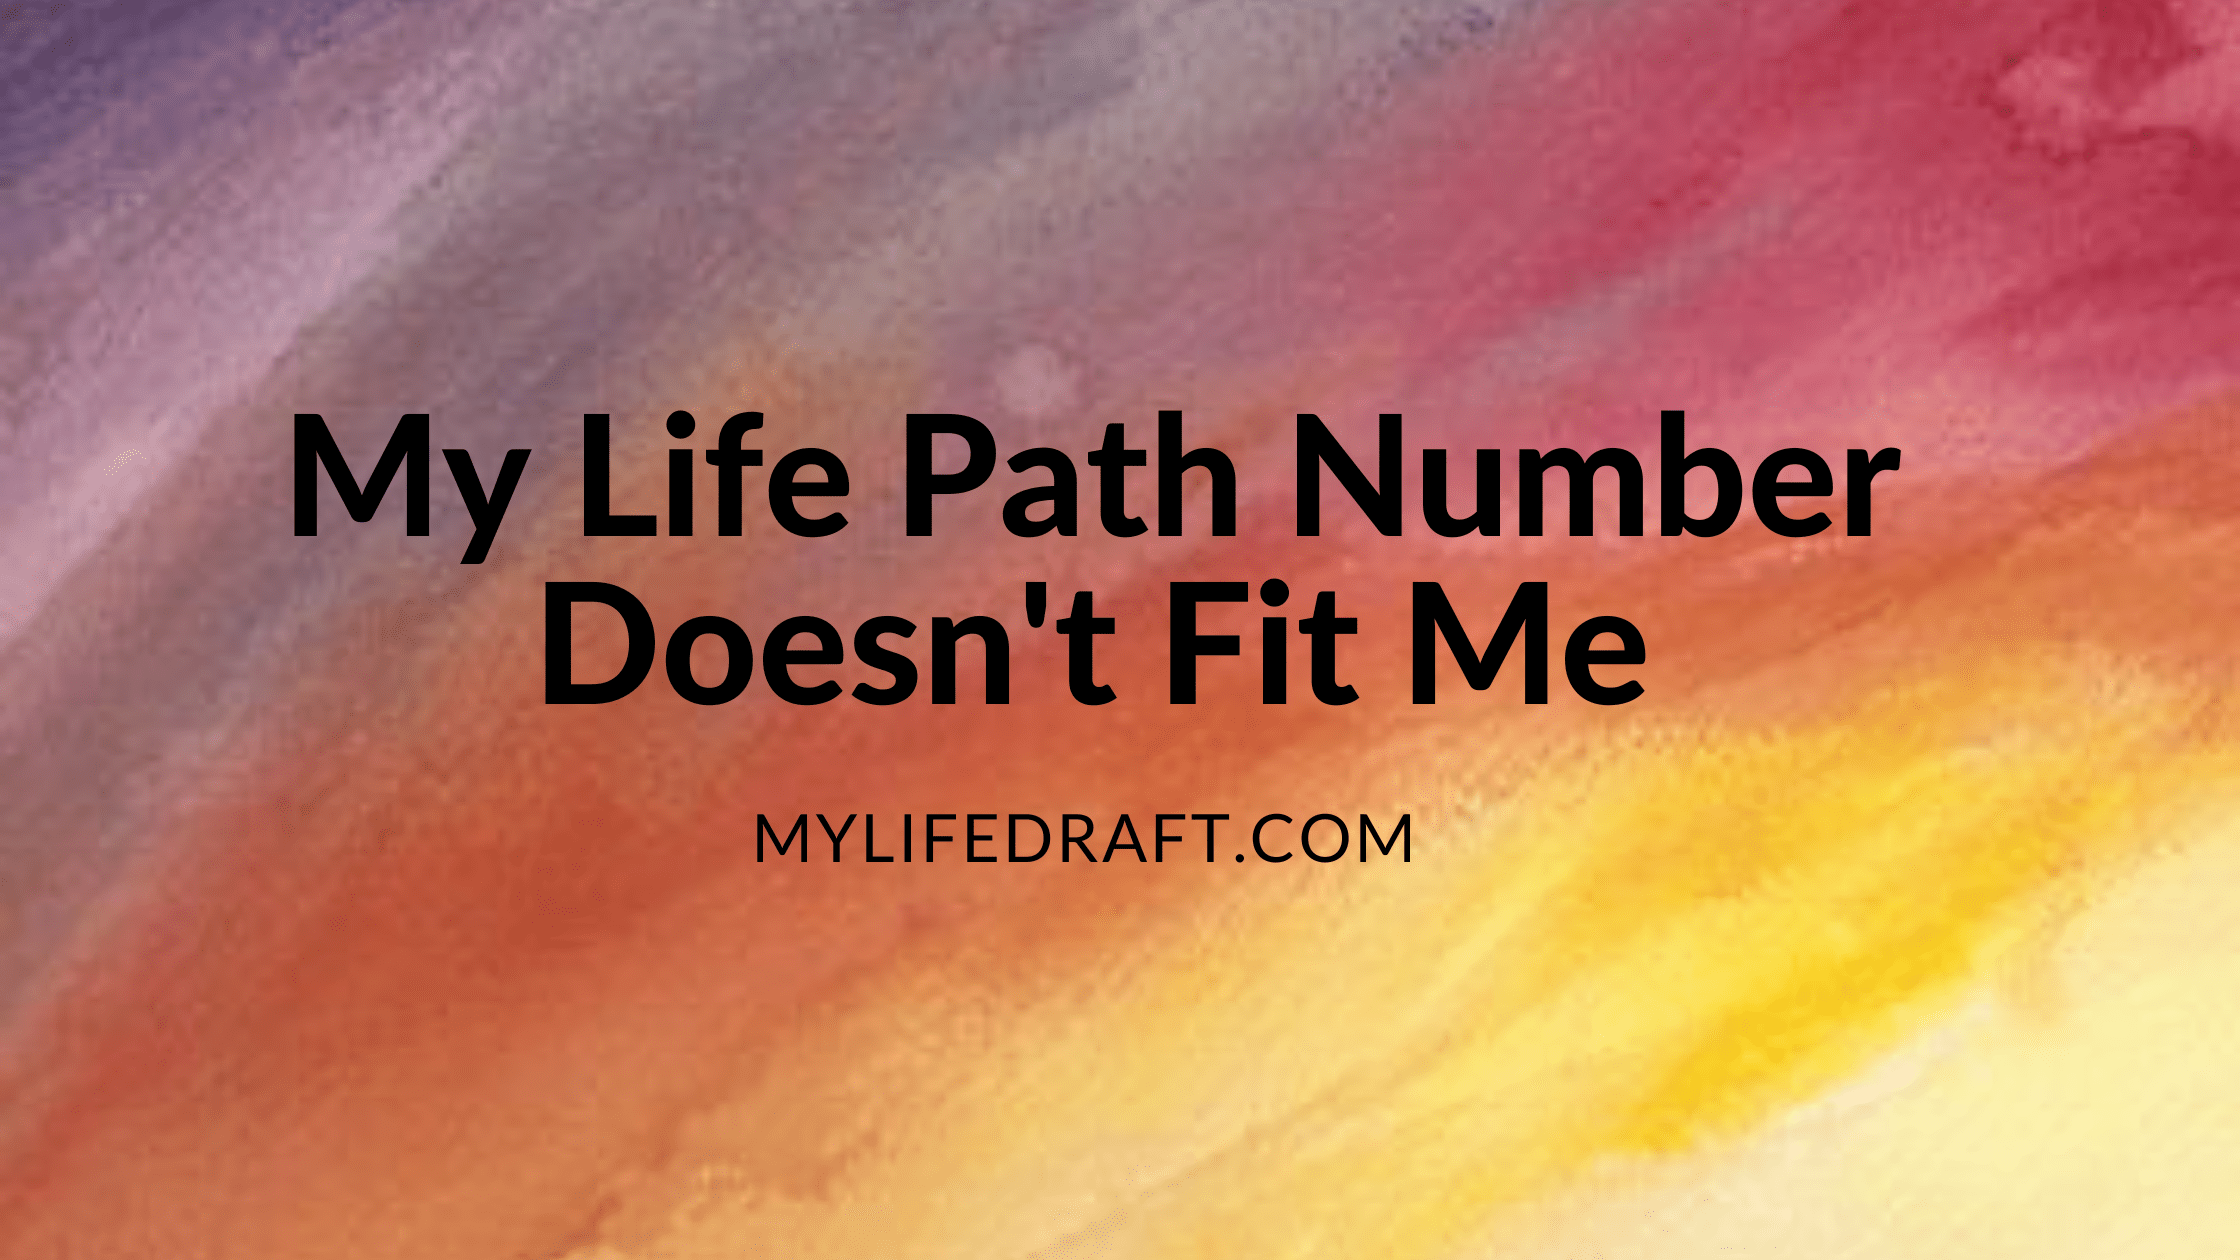 My Life Path Number Doesn't Fit Me